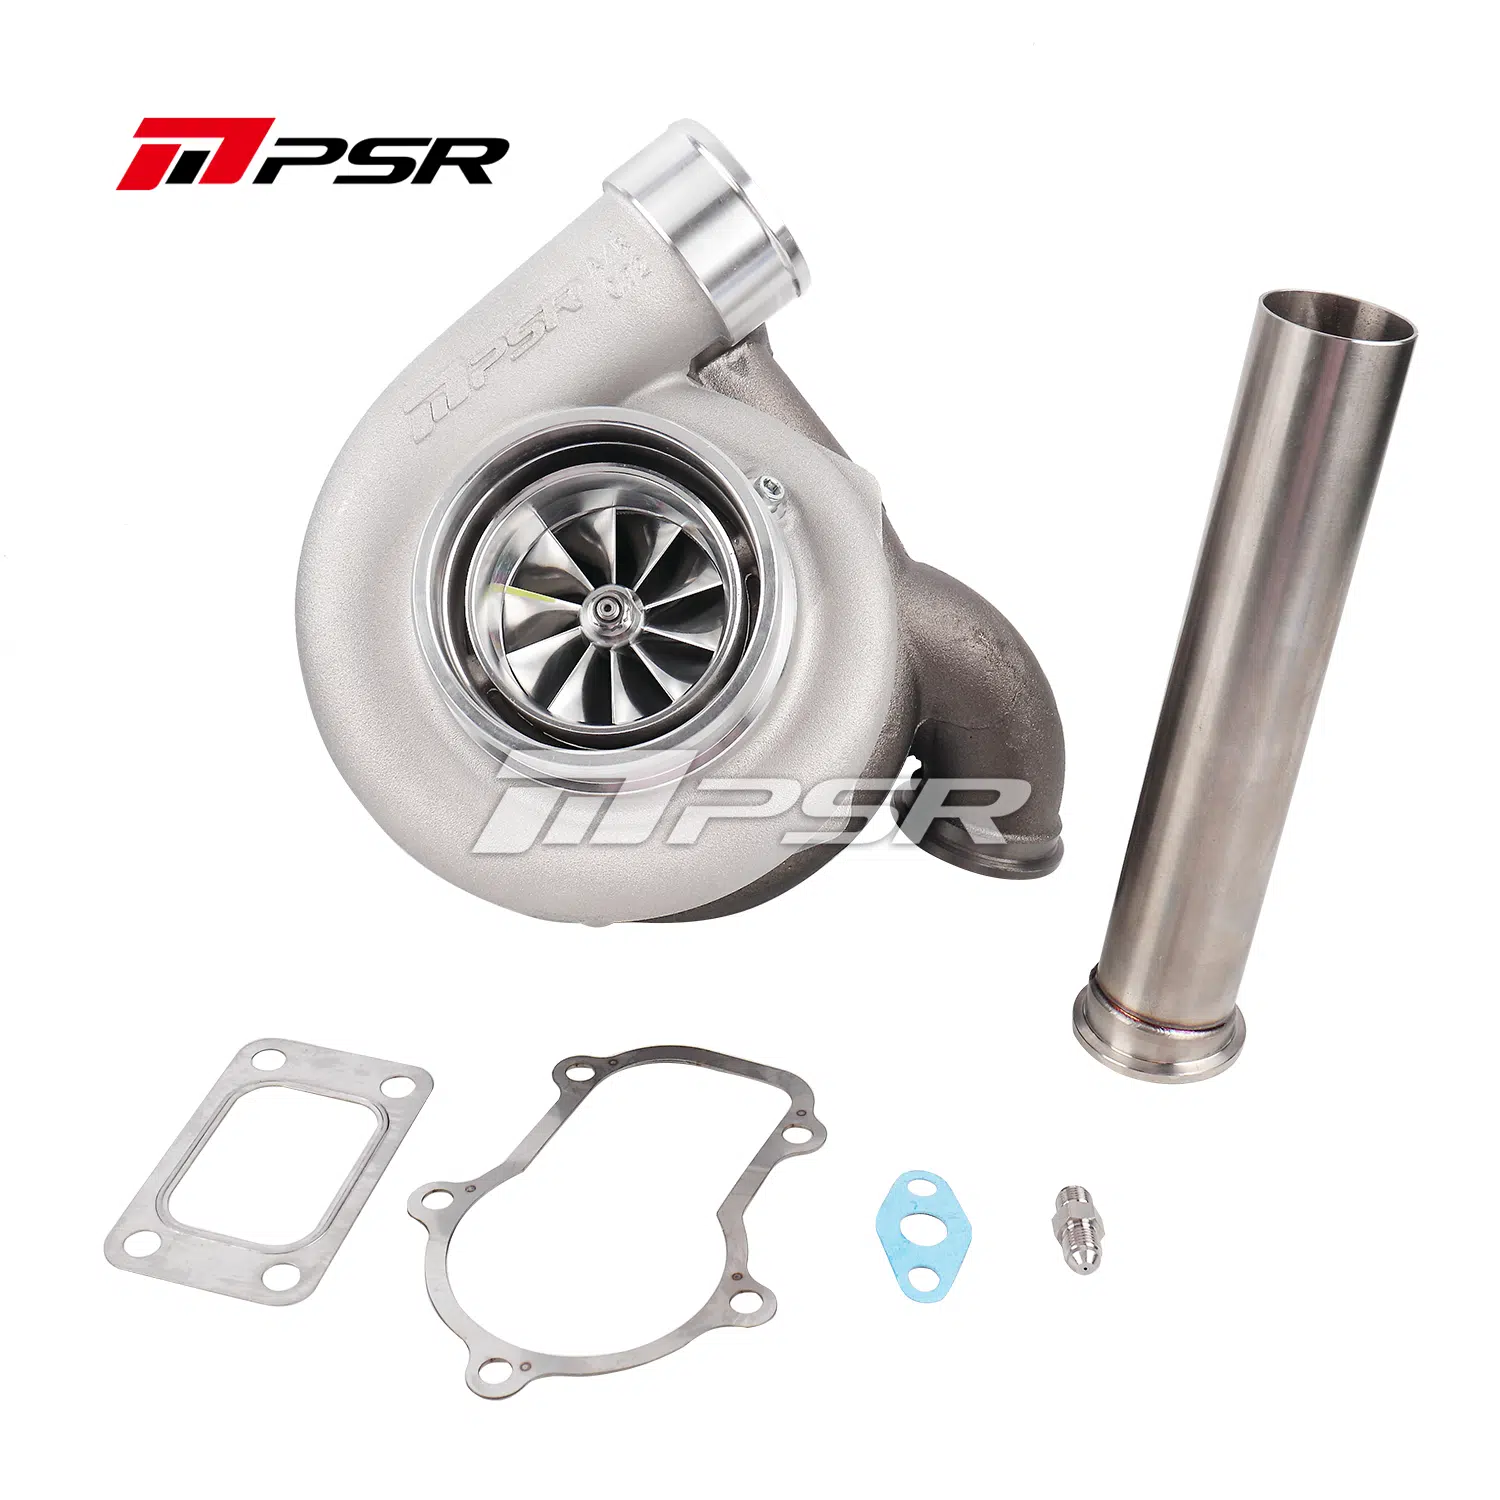 PULSAR Next GEN PSR6784 Turbocharger External Wastegate Version for Ford Falcon to replace the factory PT3582R turbo